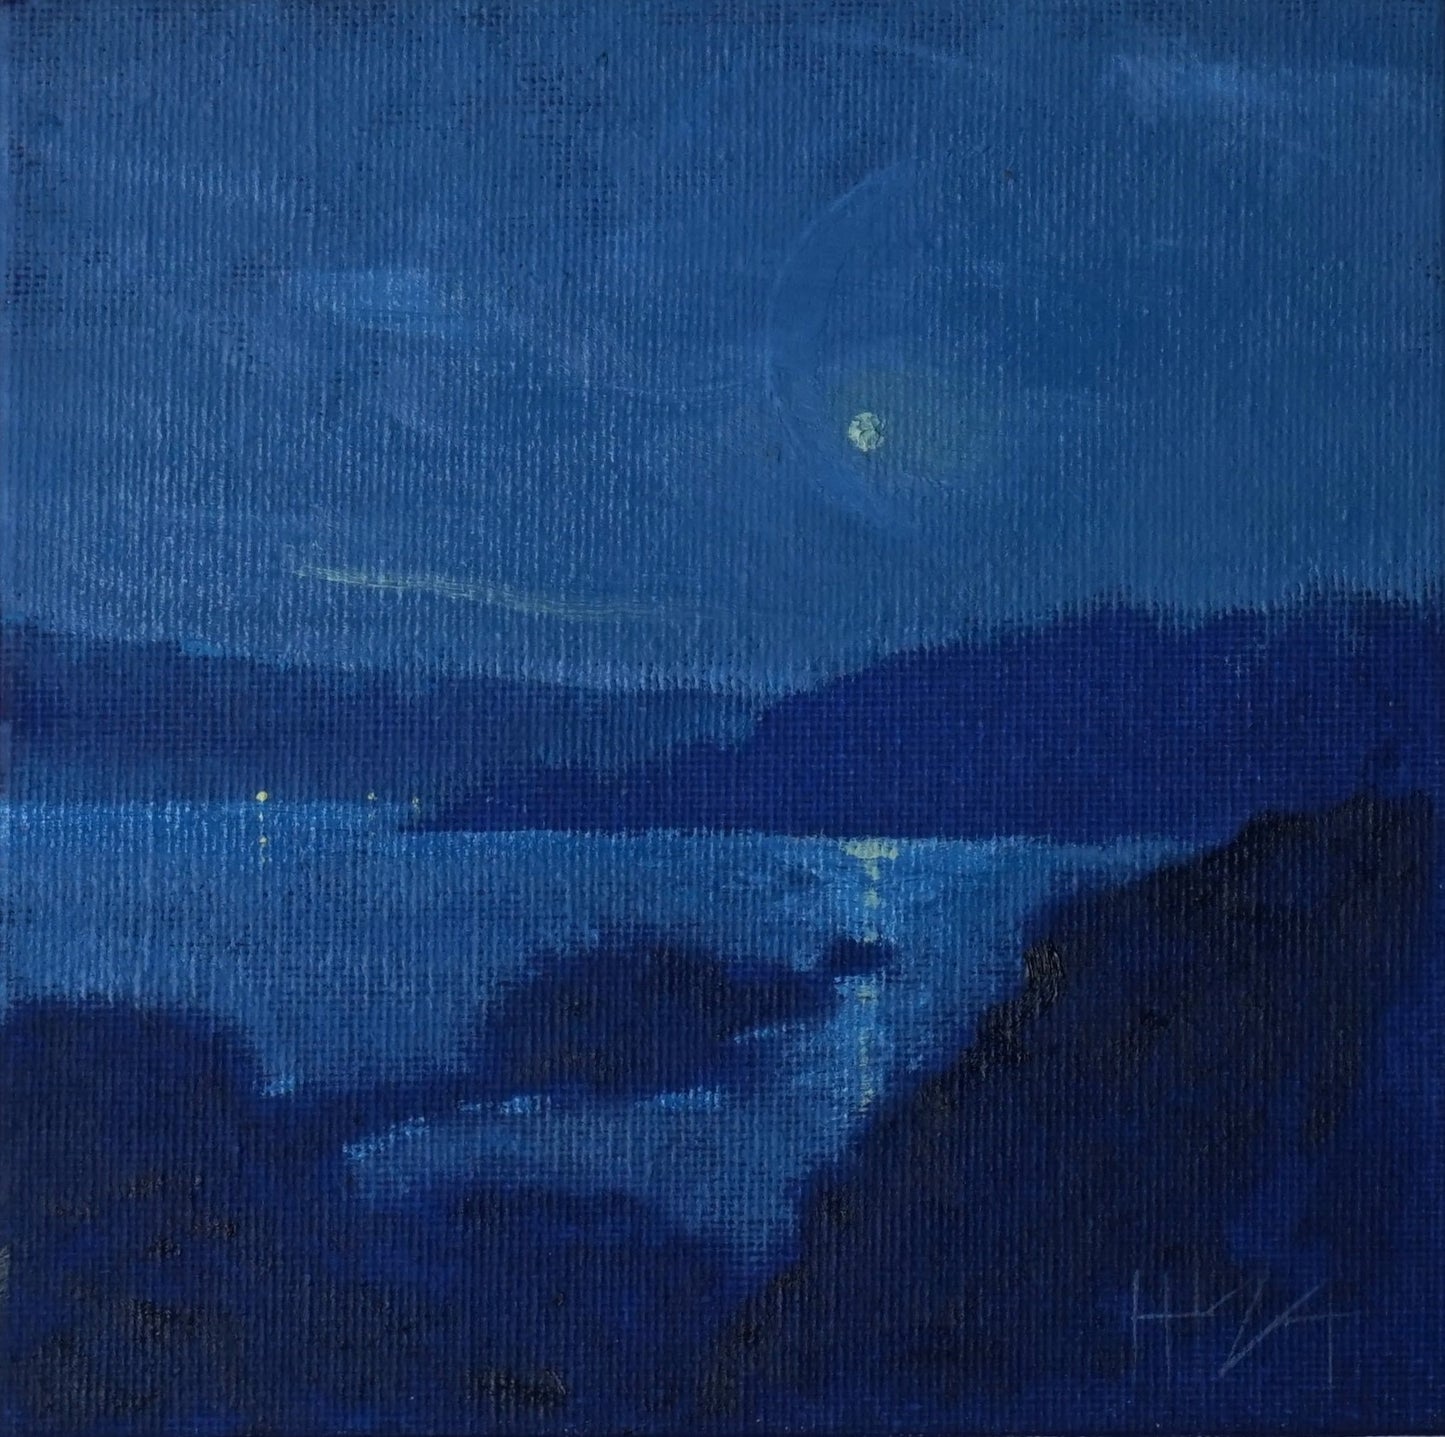 Full moon in Tamano- 15x15cm / Oil painting on canvas panel